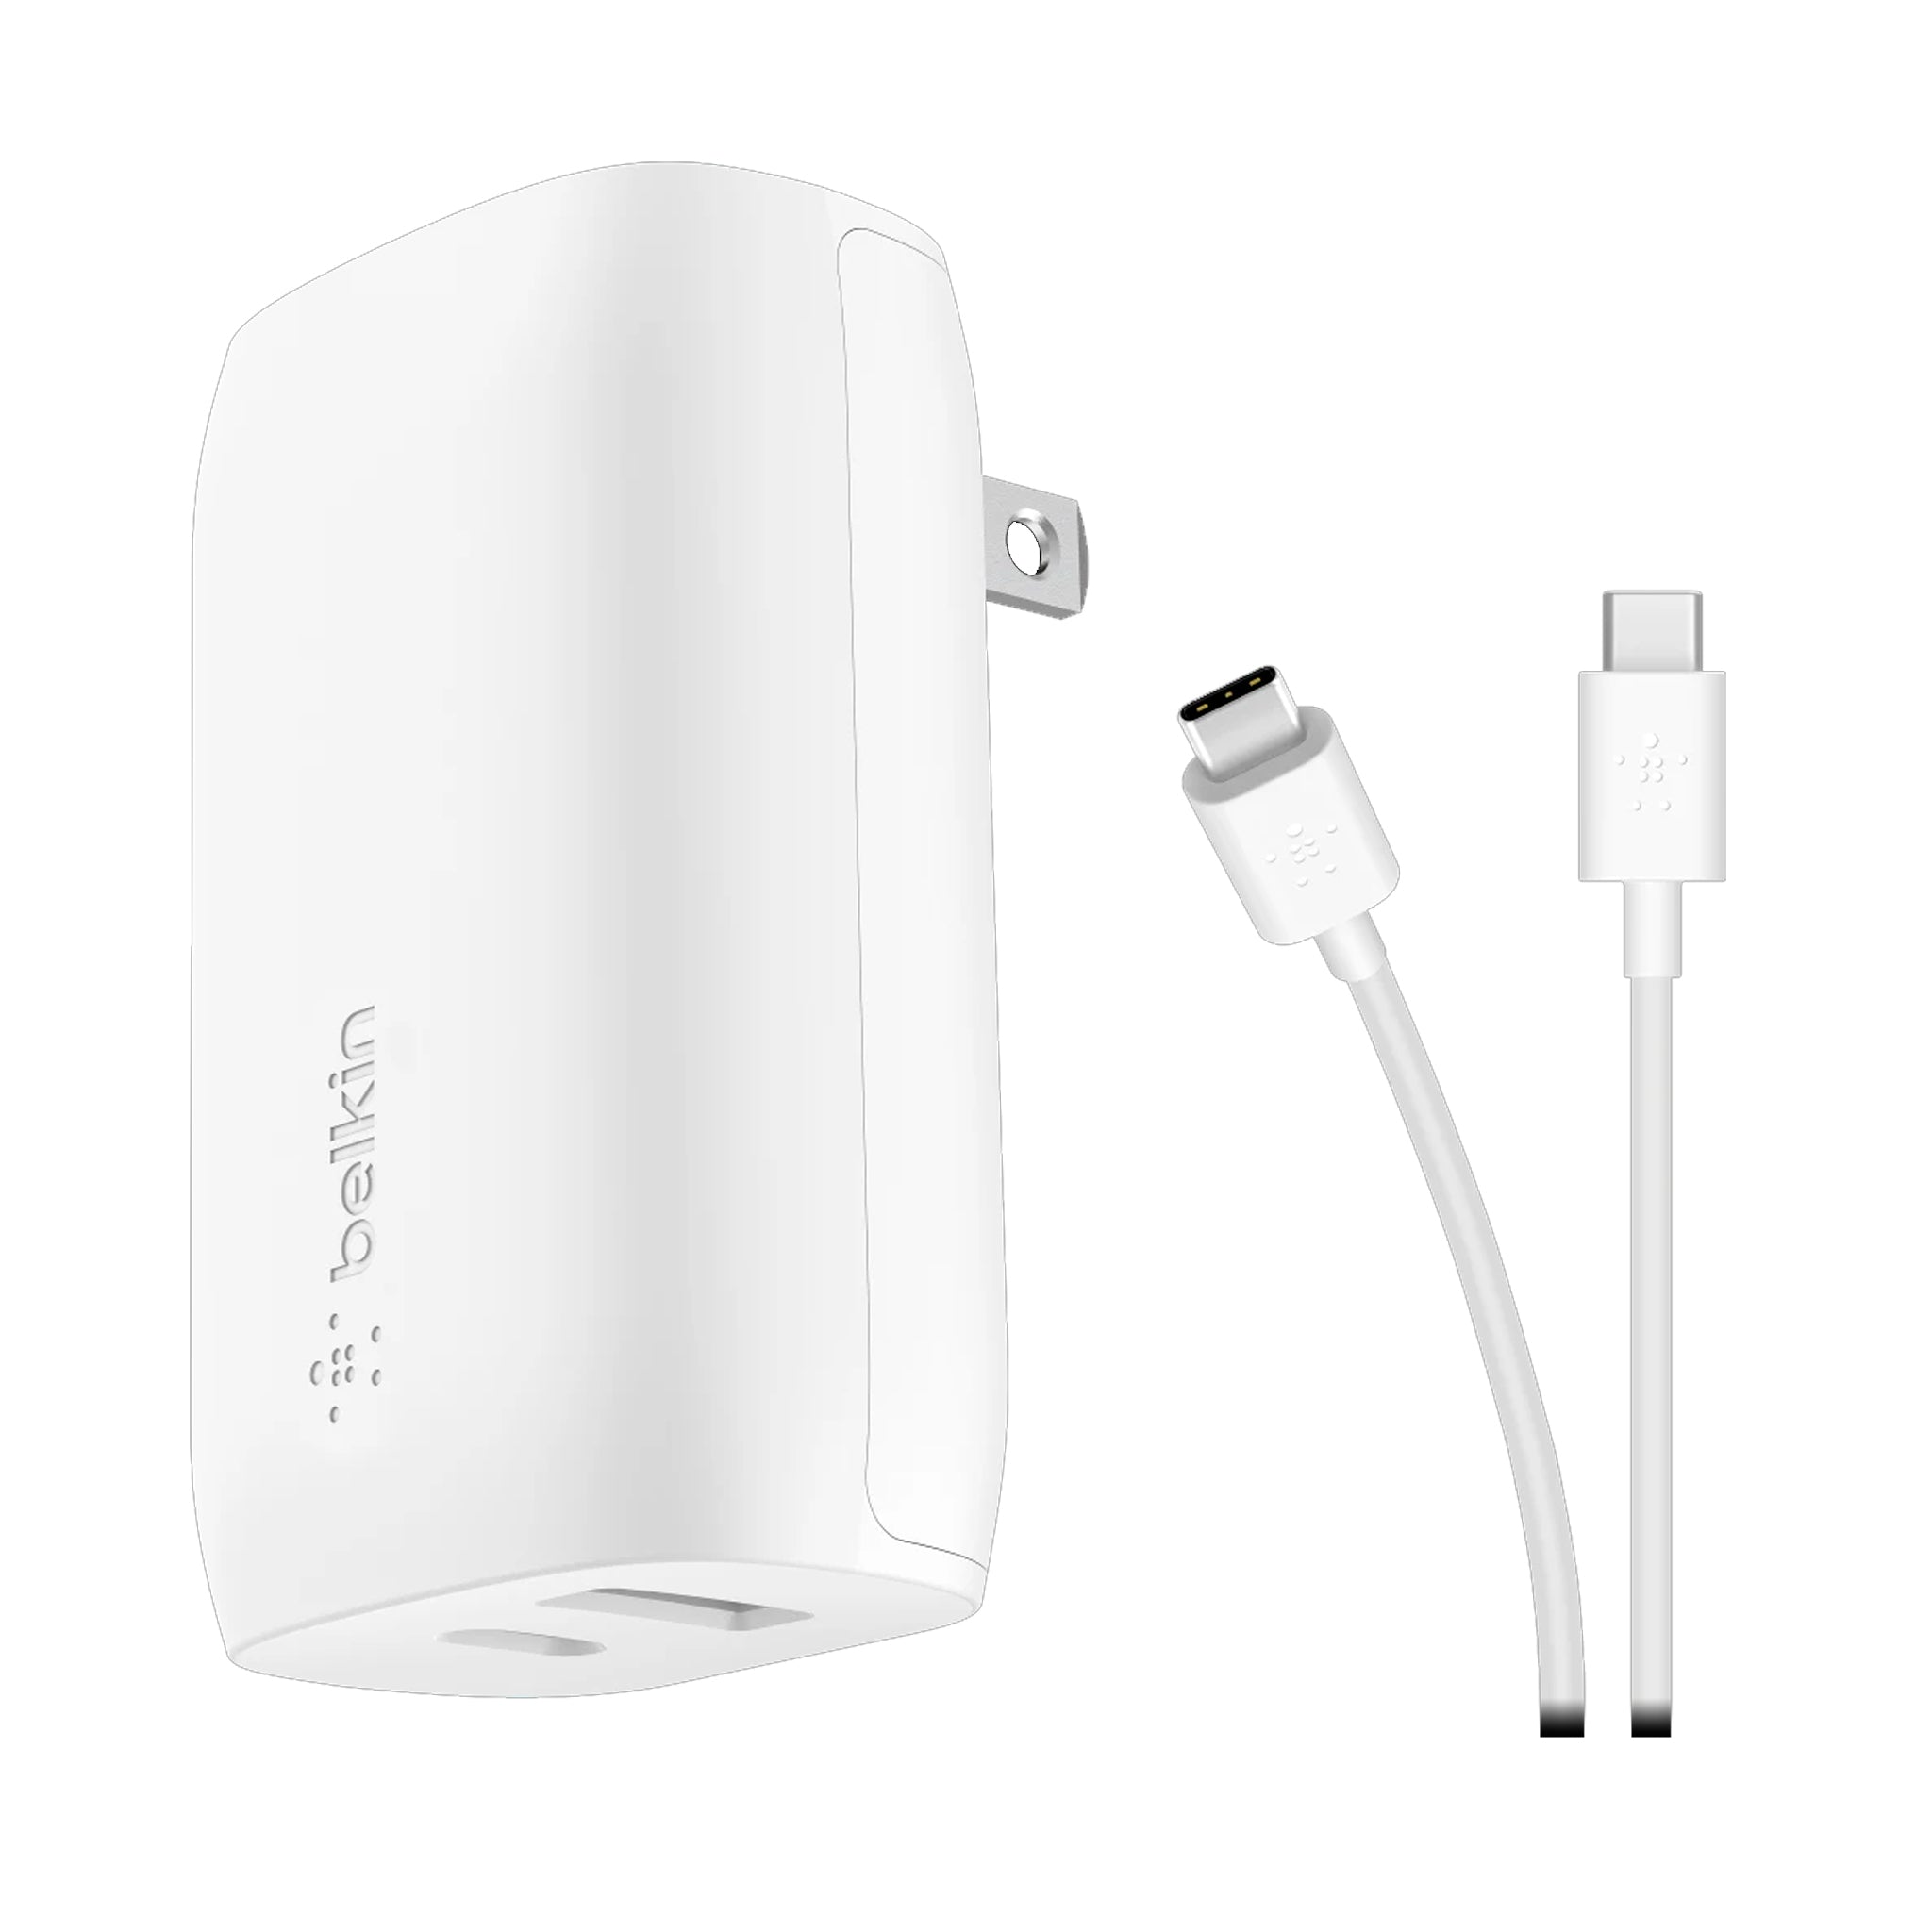 Belkin Dual 37W Wall Charger and USB-C to USB-C Cable